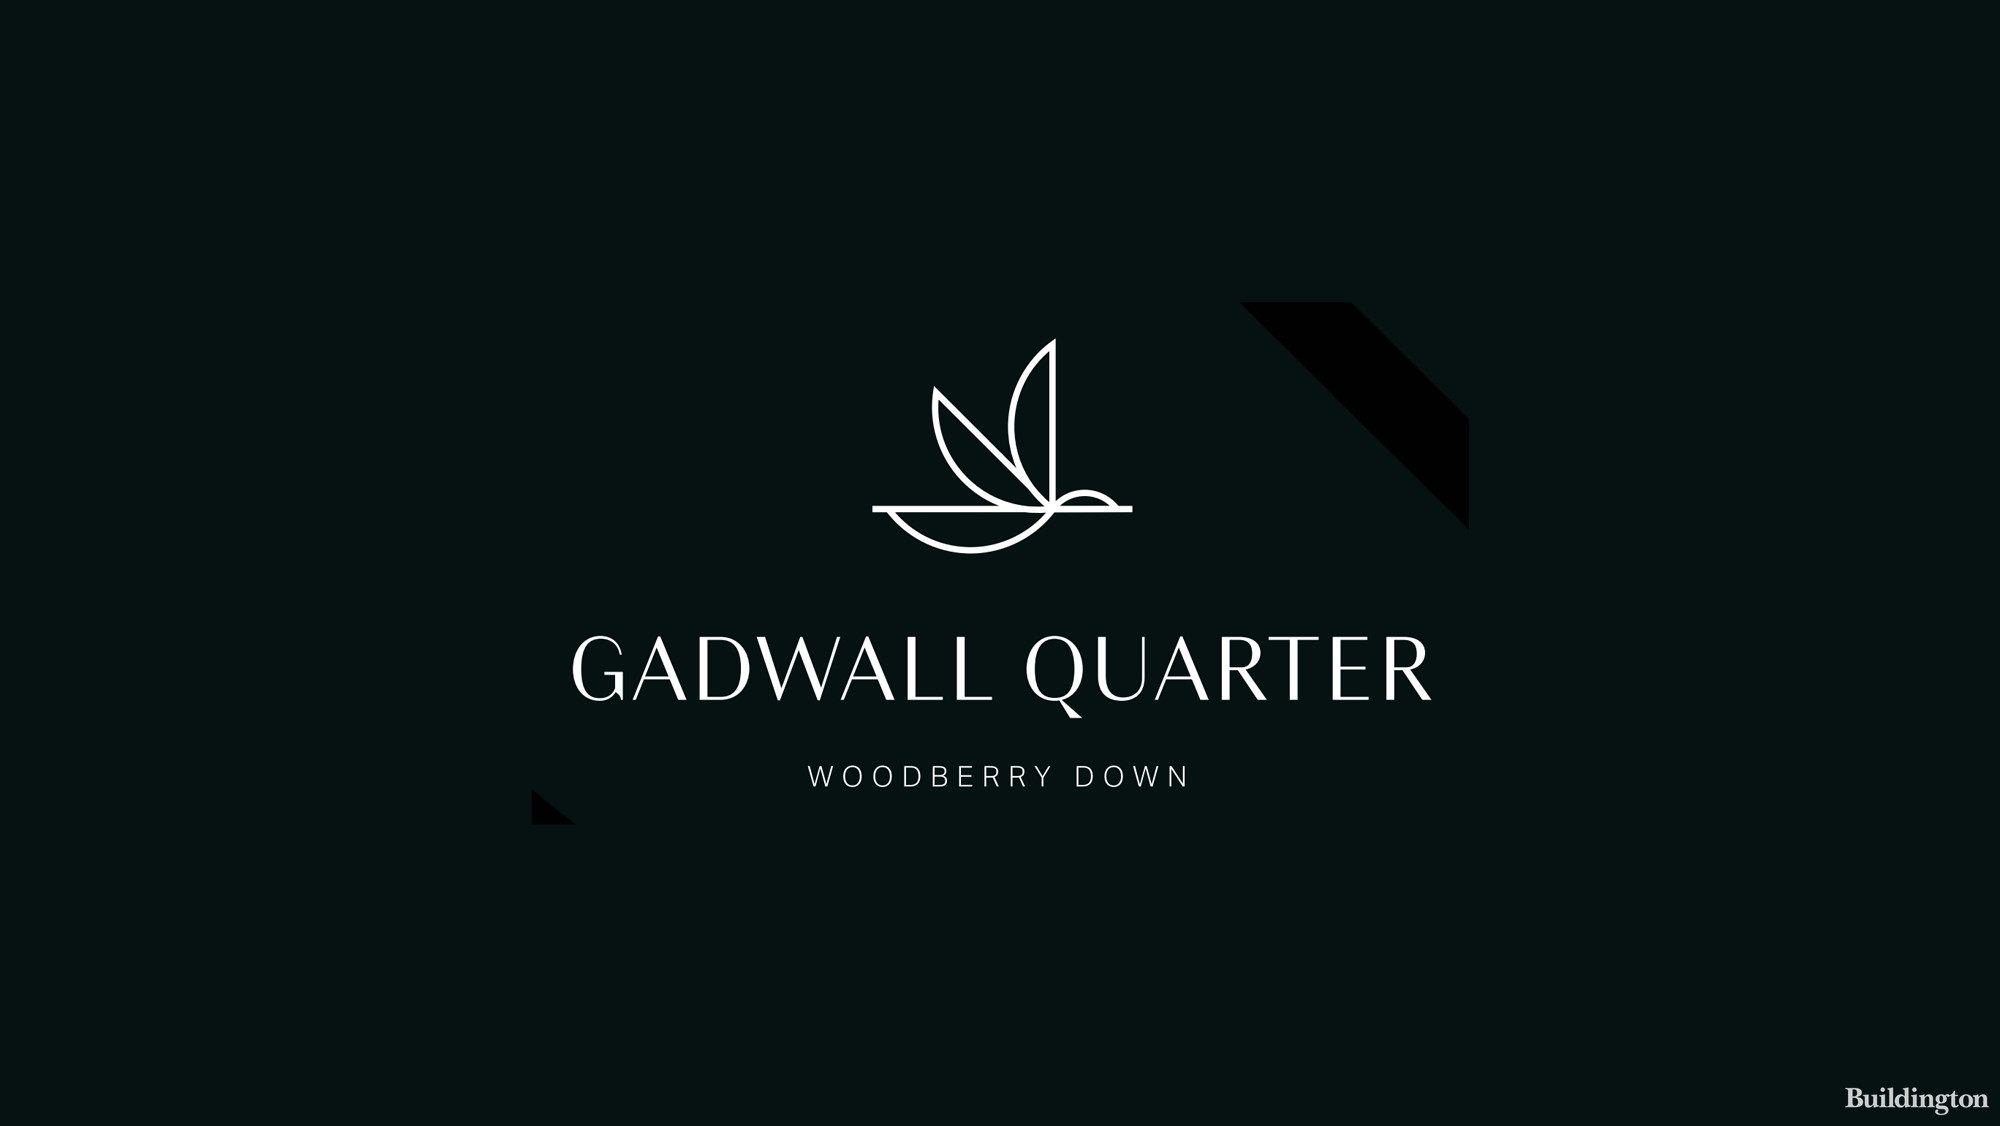 Logo cover for Gadwall Quarter development in Woodberry Down, London N4